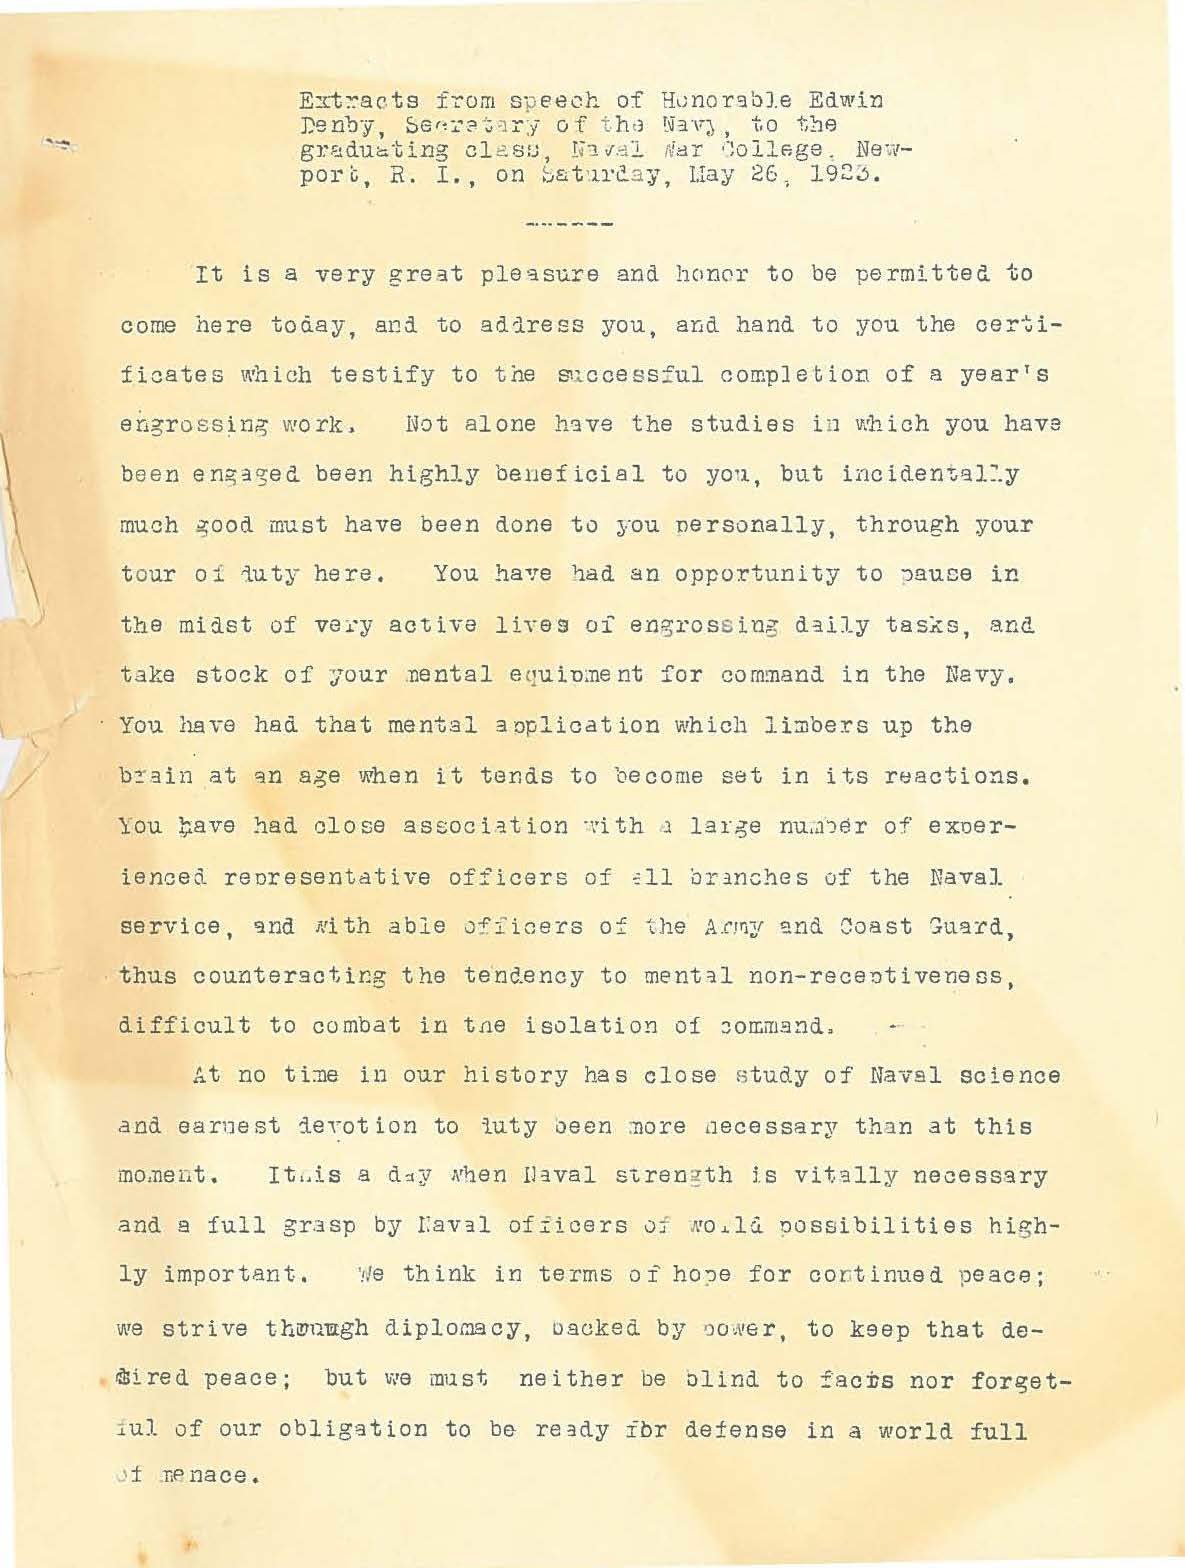 Extracts from speech to graduating class of 1923, Edwin  Denby